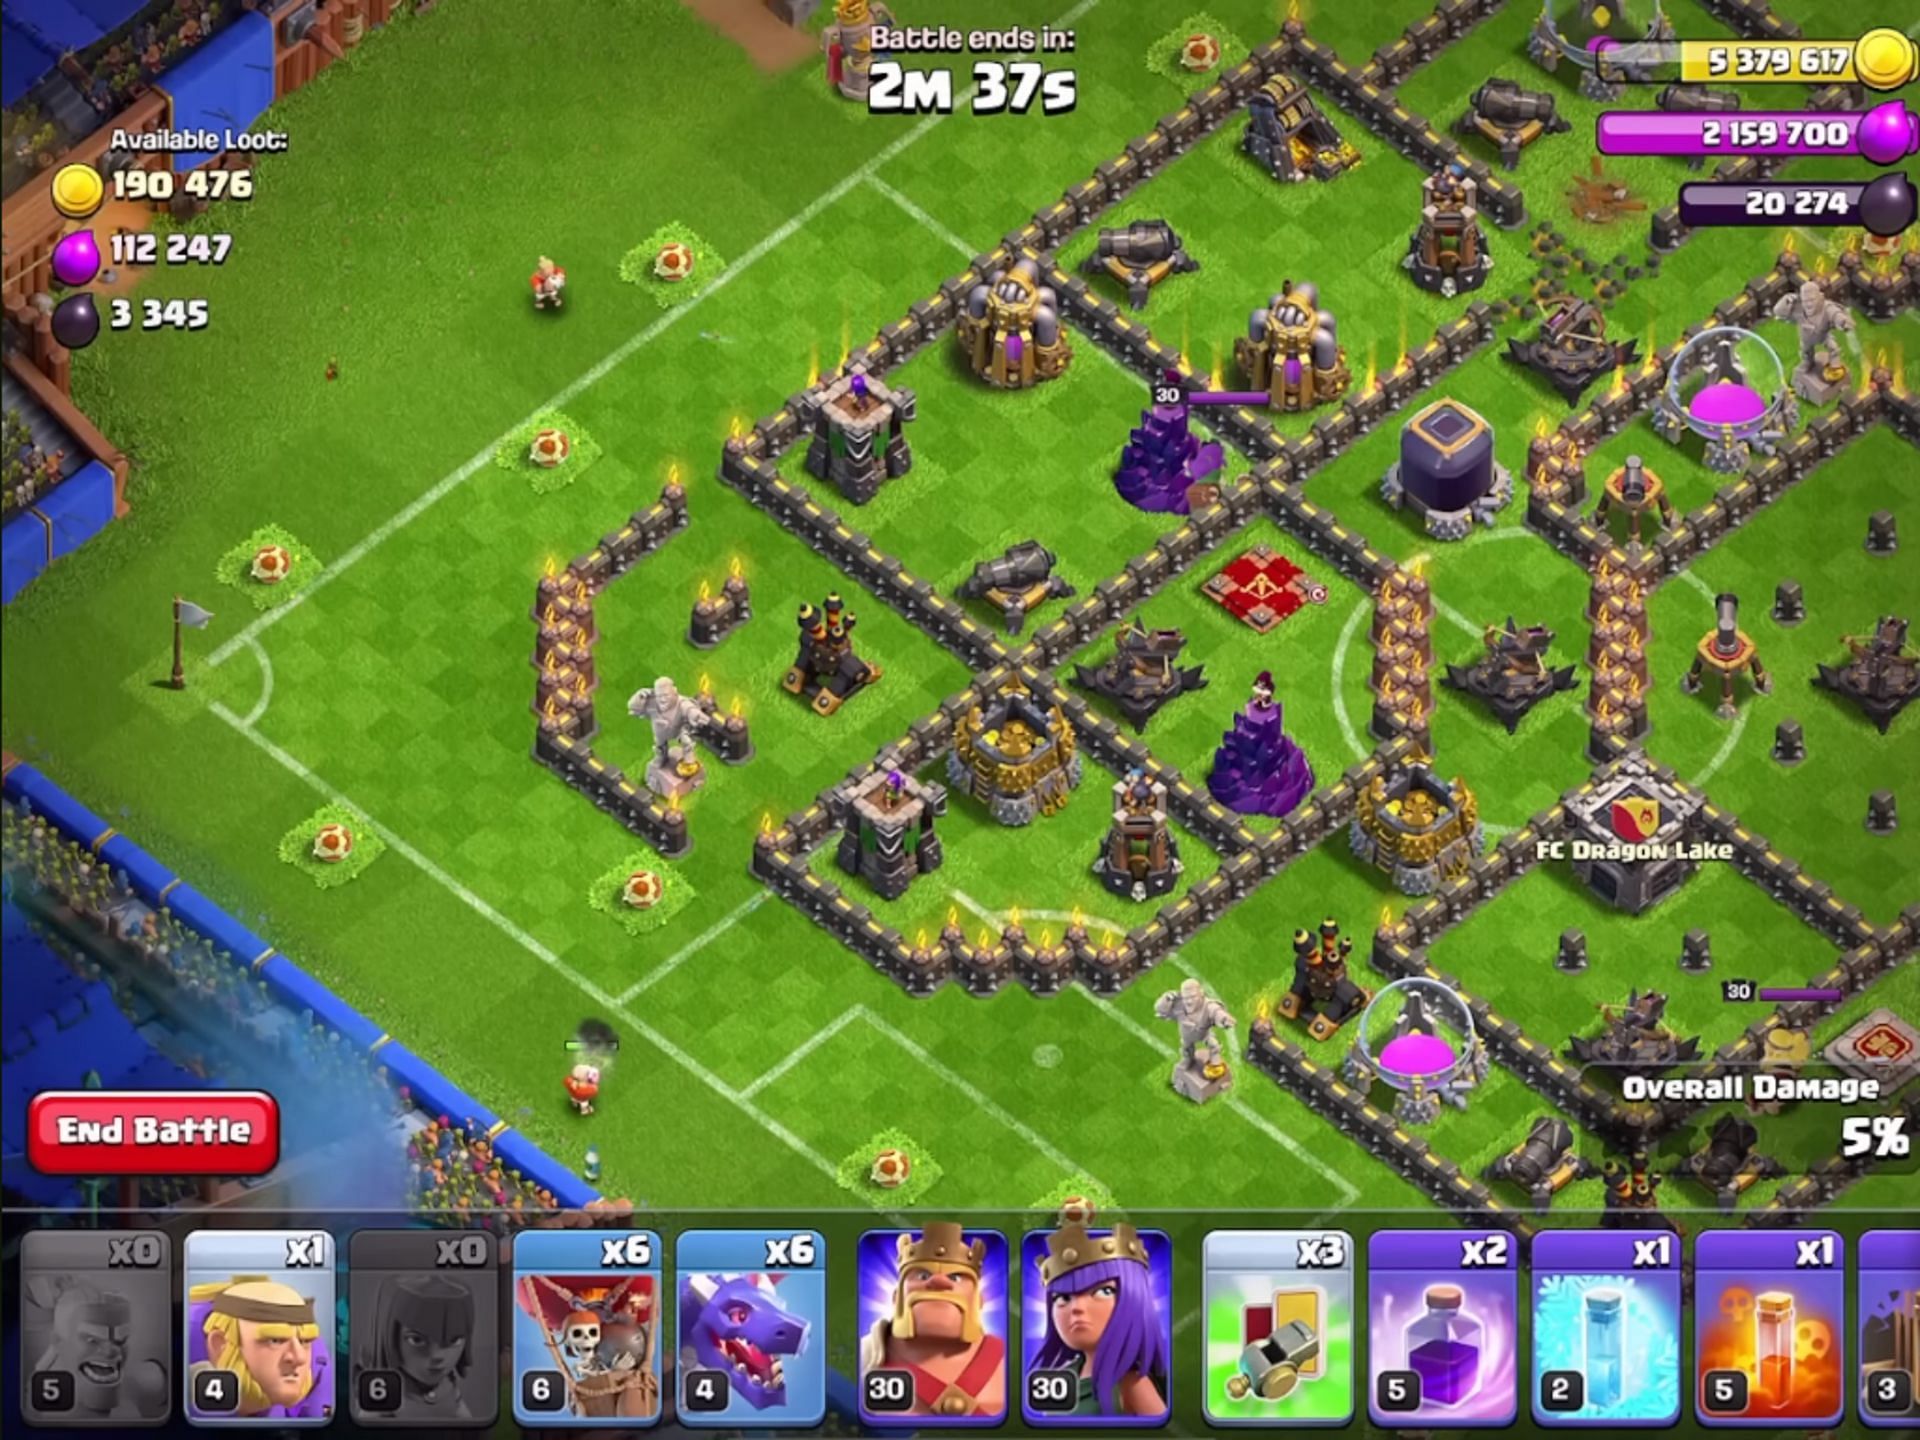 Targetting the Archer Towers (Image via Supercell)